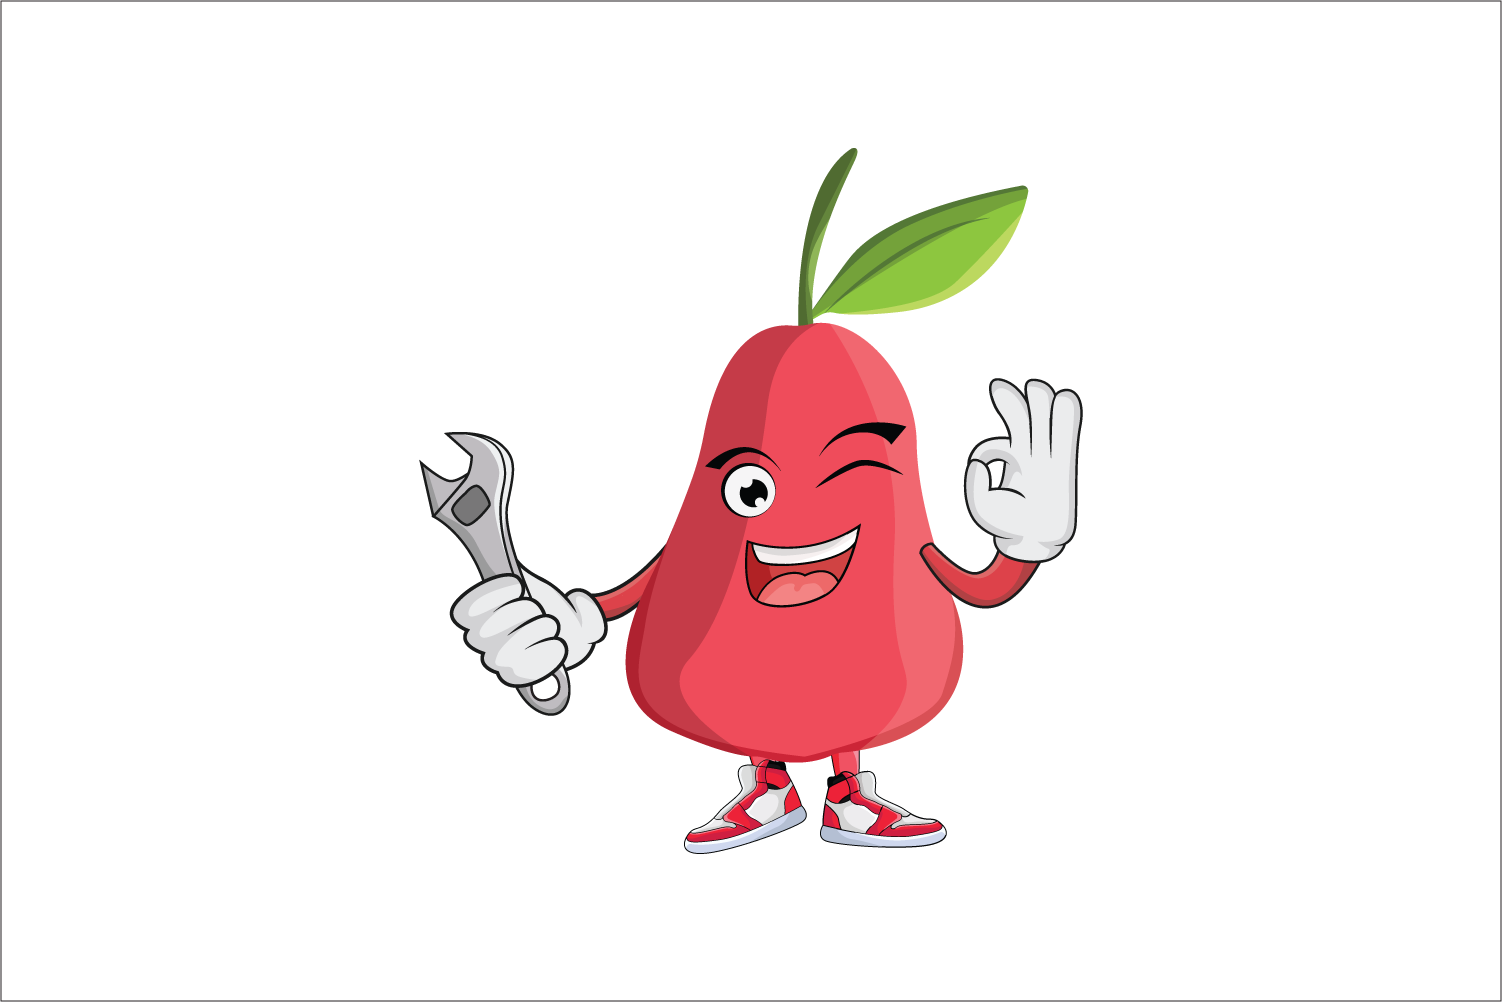 Rose Apple With Wrench Fruit Cartoon Character Design By Printables Plazza Thehungryjpeg Com